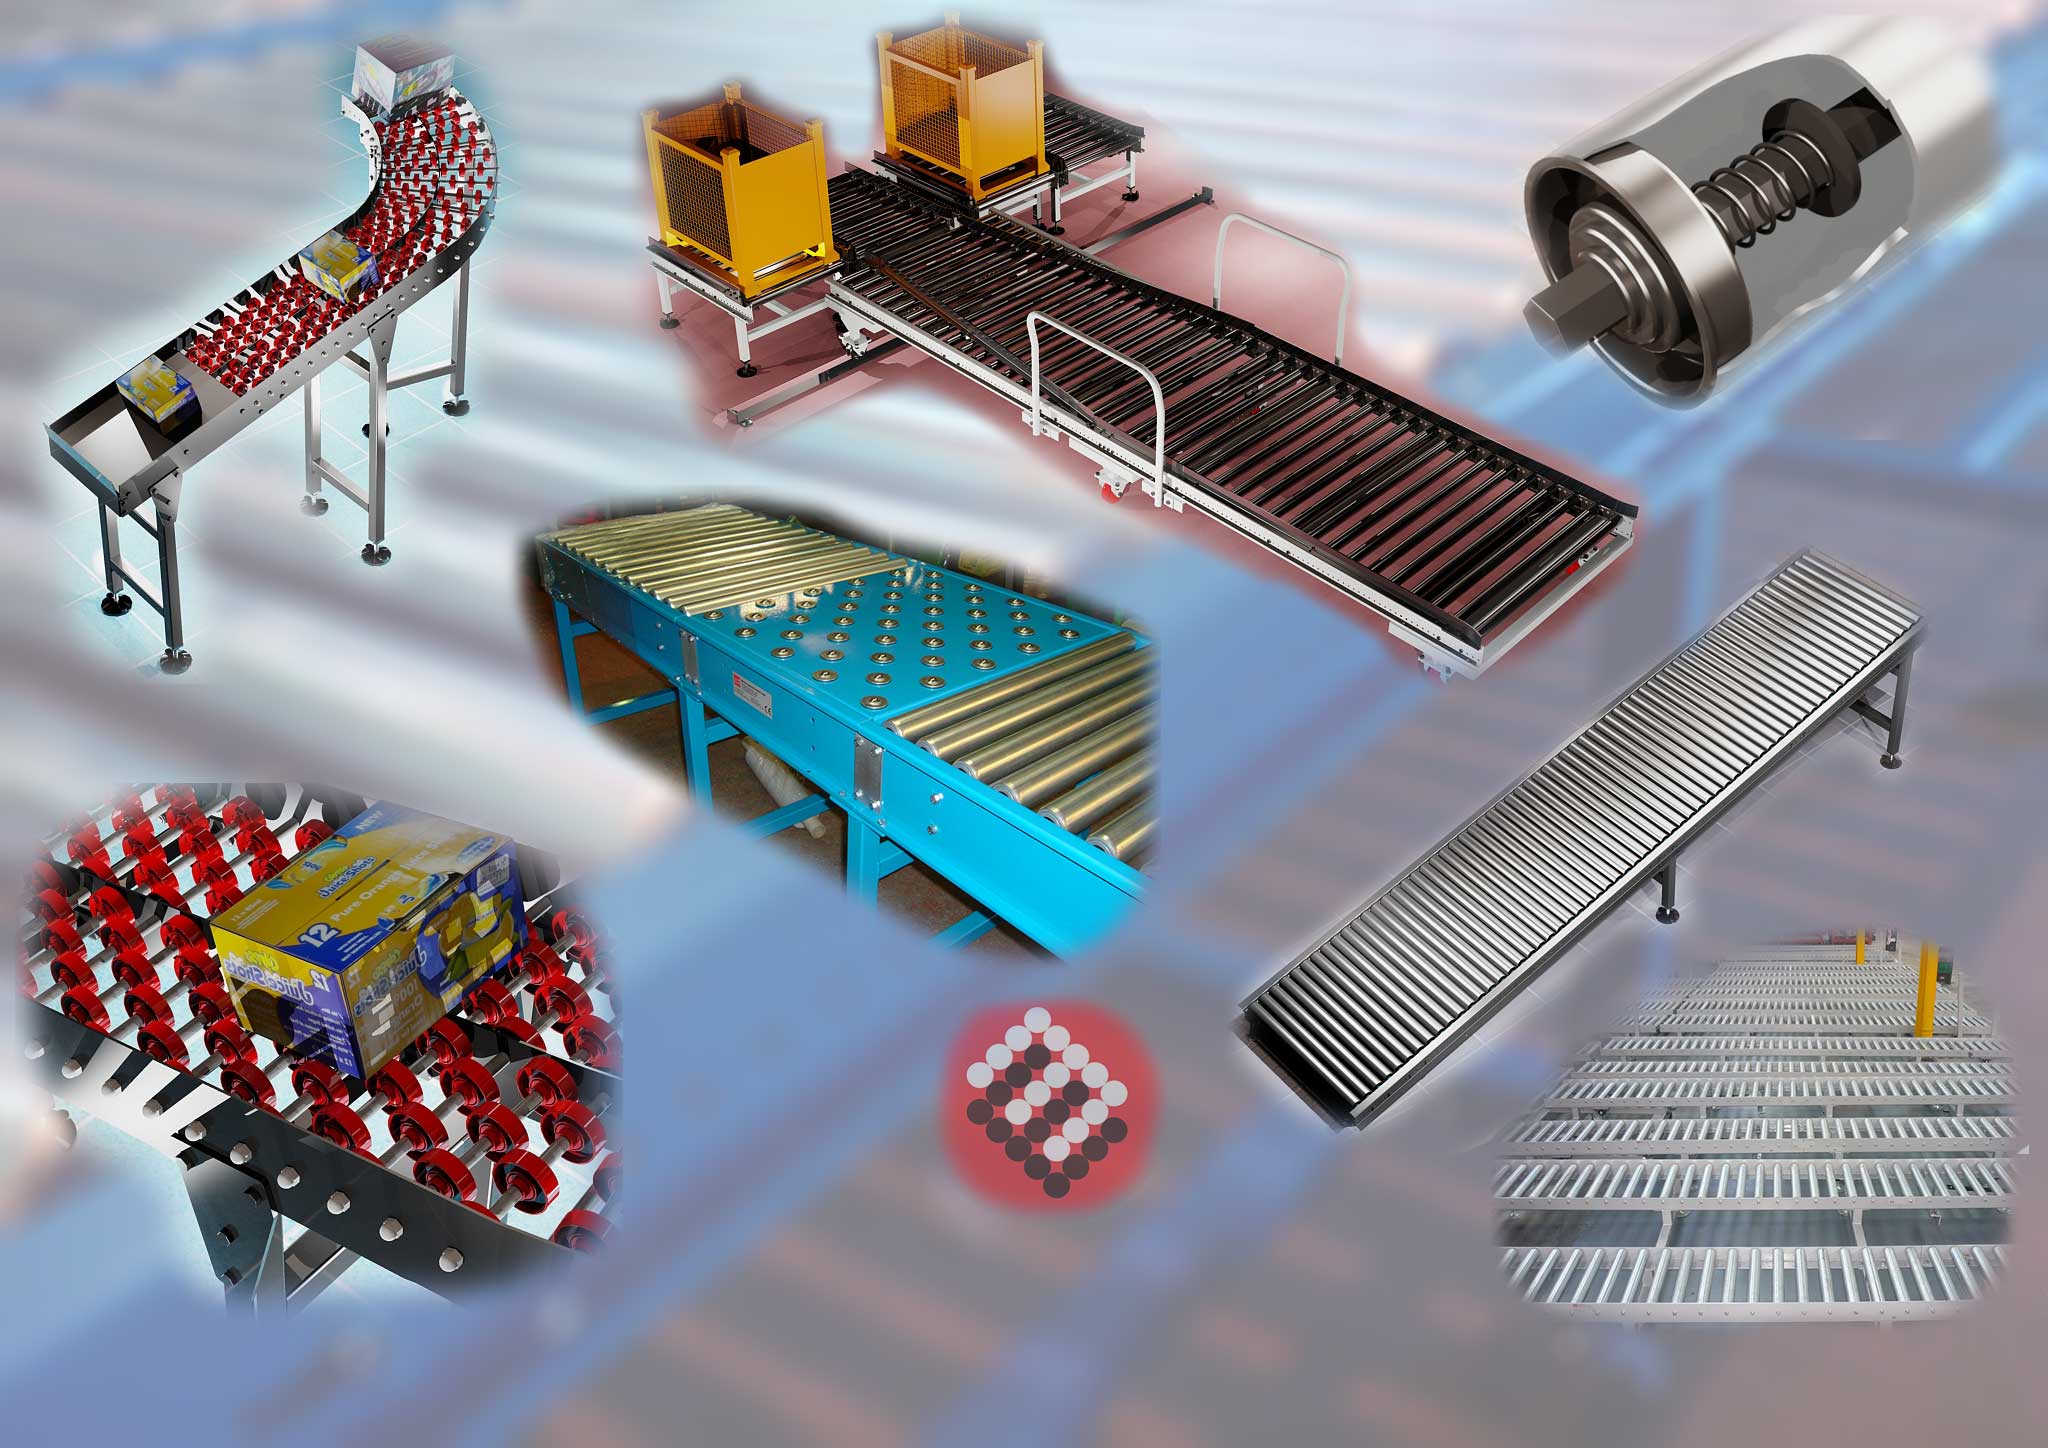 Suppliers of Turnover and Inspection Conveyors UK